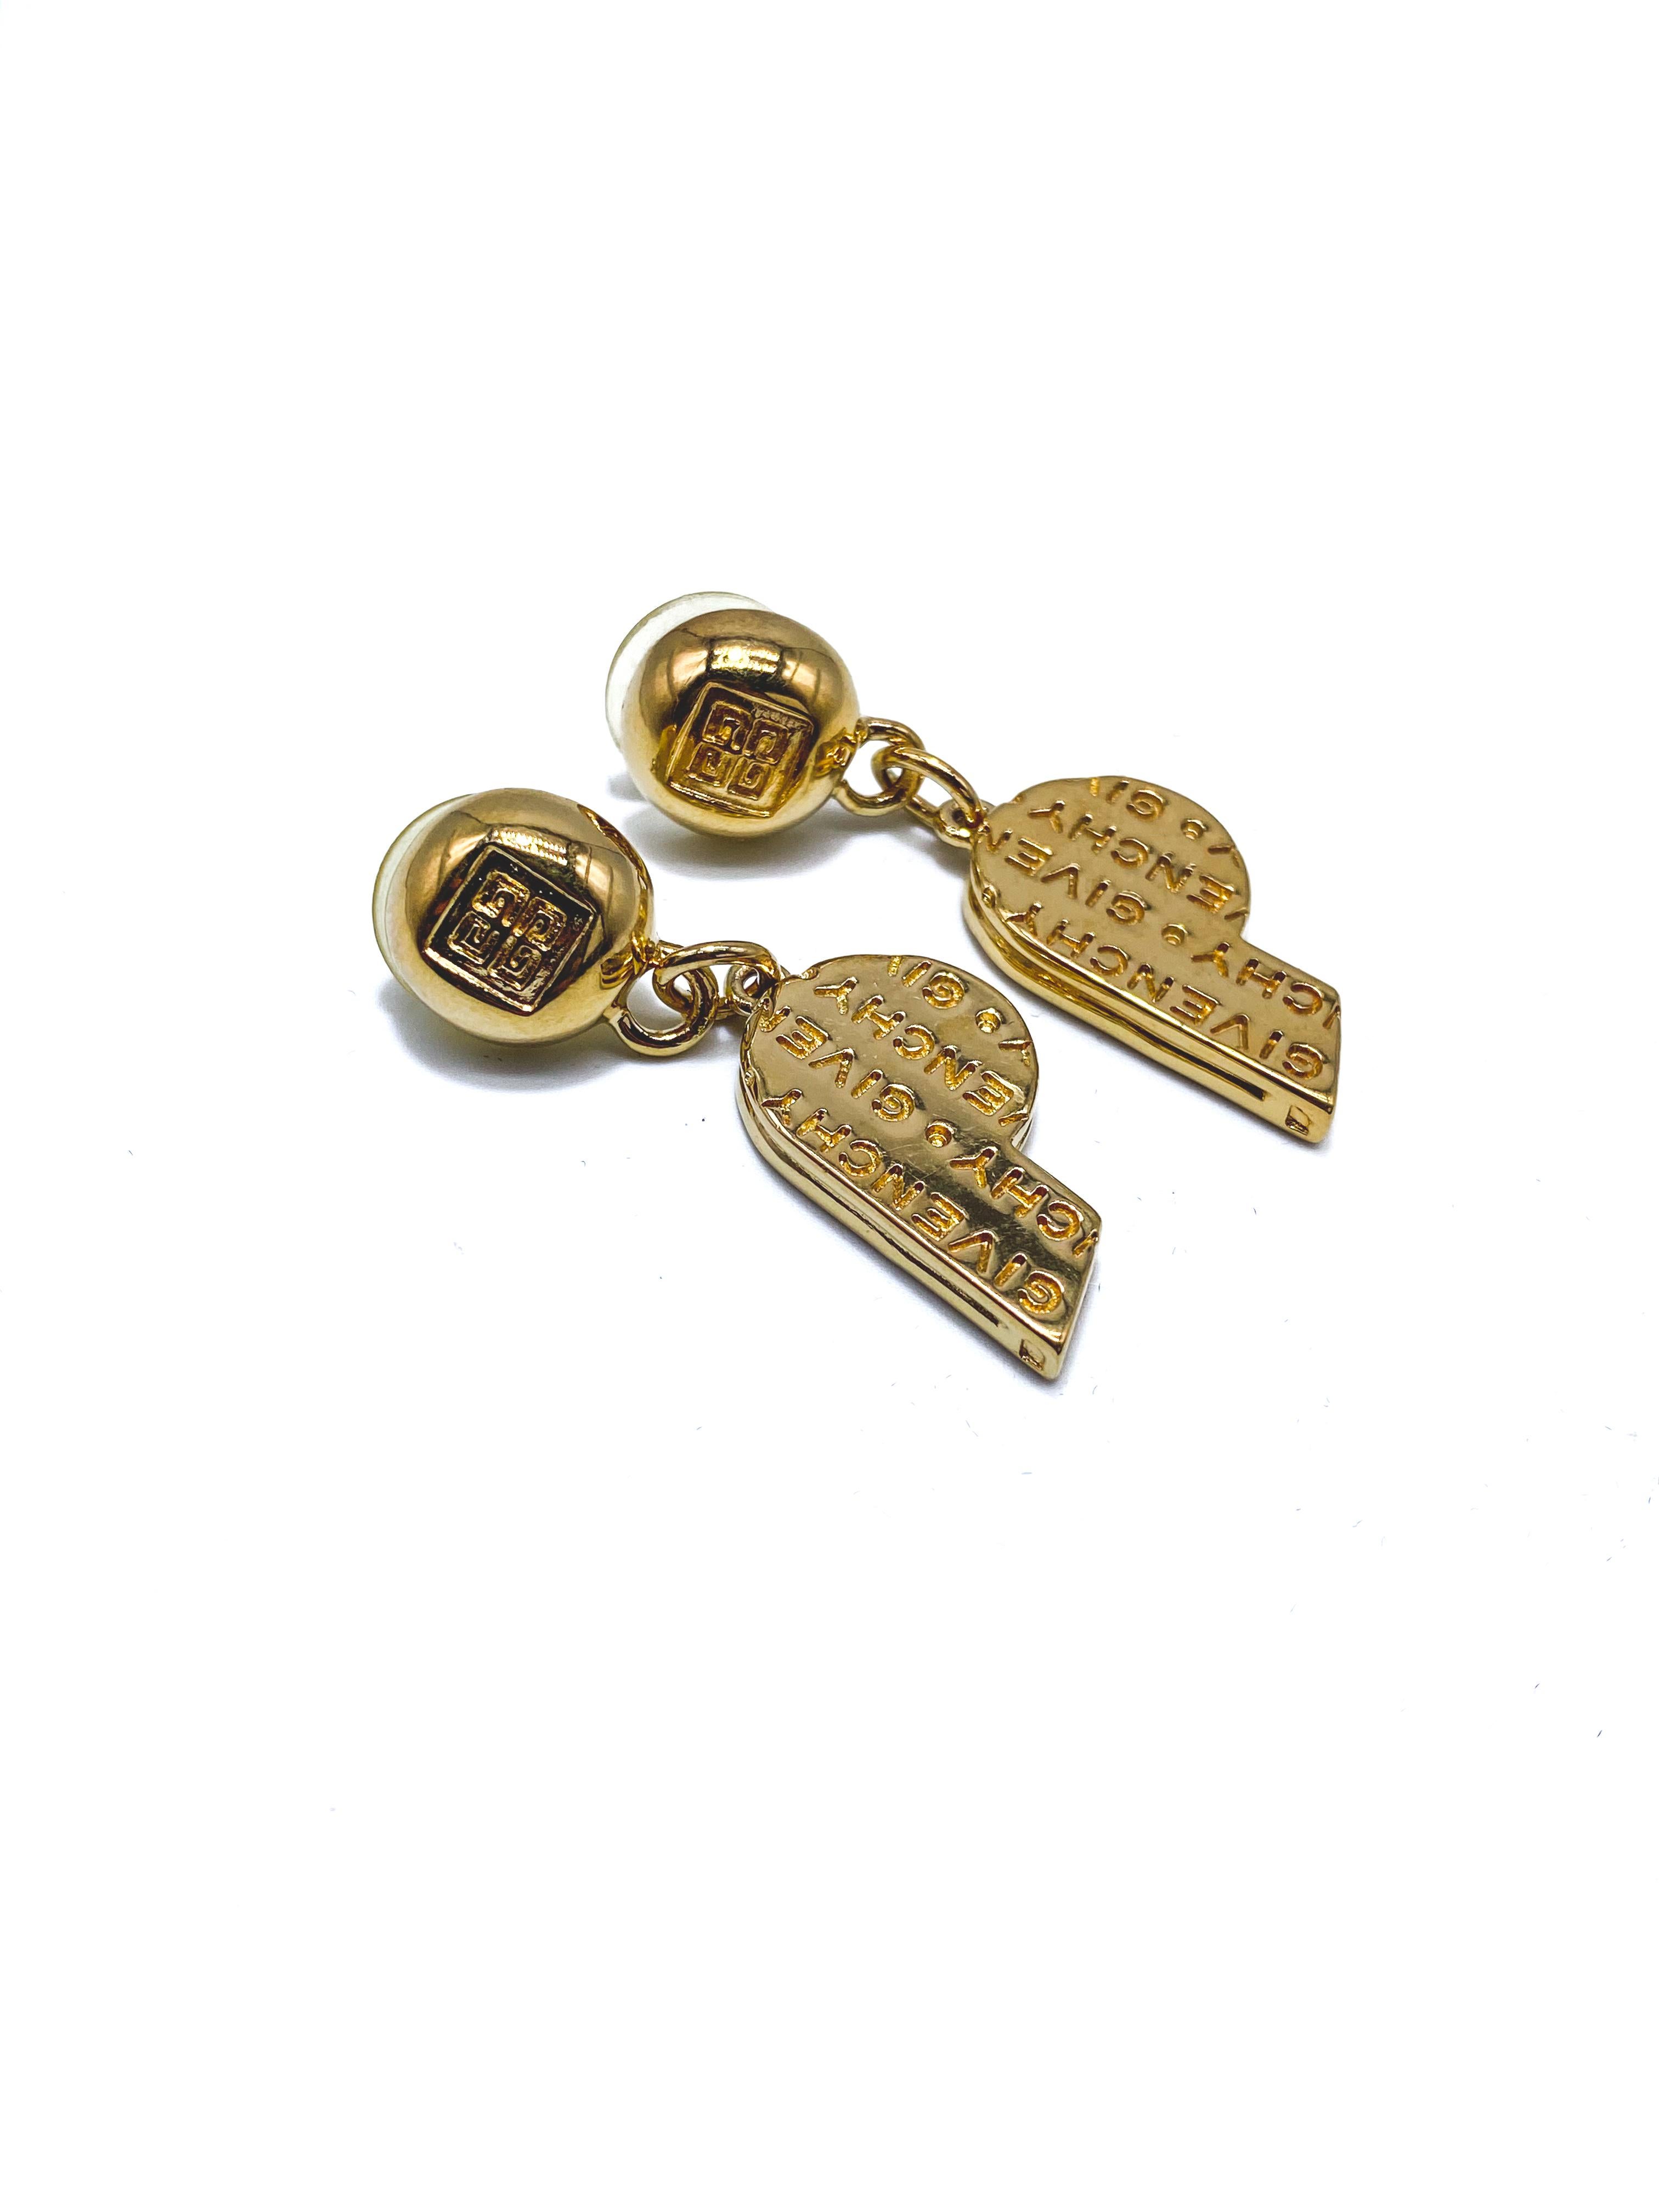 Givenchy 1980s Vintage Whistle Earrings

Super-cool whistle drop earrings from the Givenchy 80s archive.

Detail
-Made in France in the 1980s
-Crafted from gold plated metal
-Embossed with a Givenchy repeat pattern 

Size & Fit
-Drop measures approx